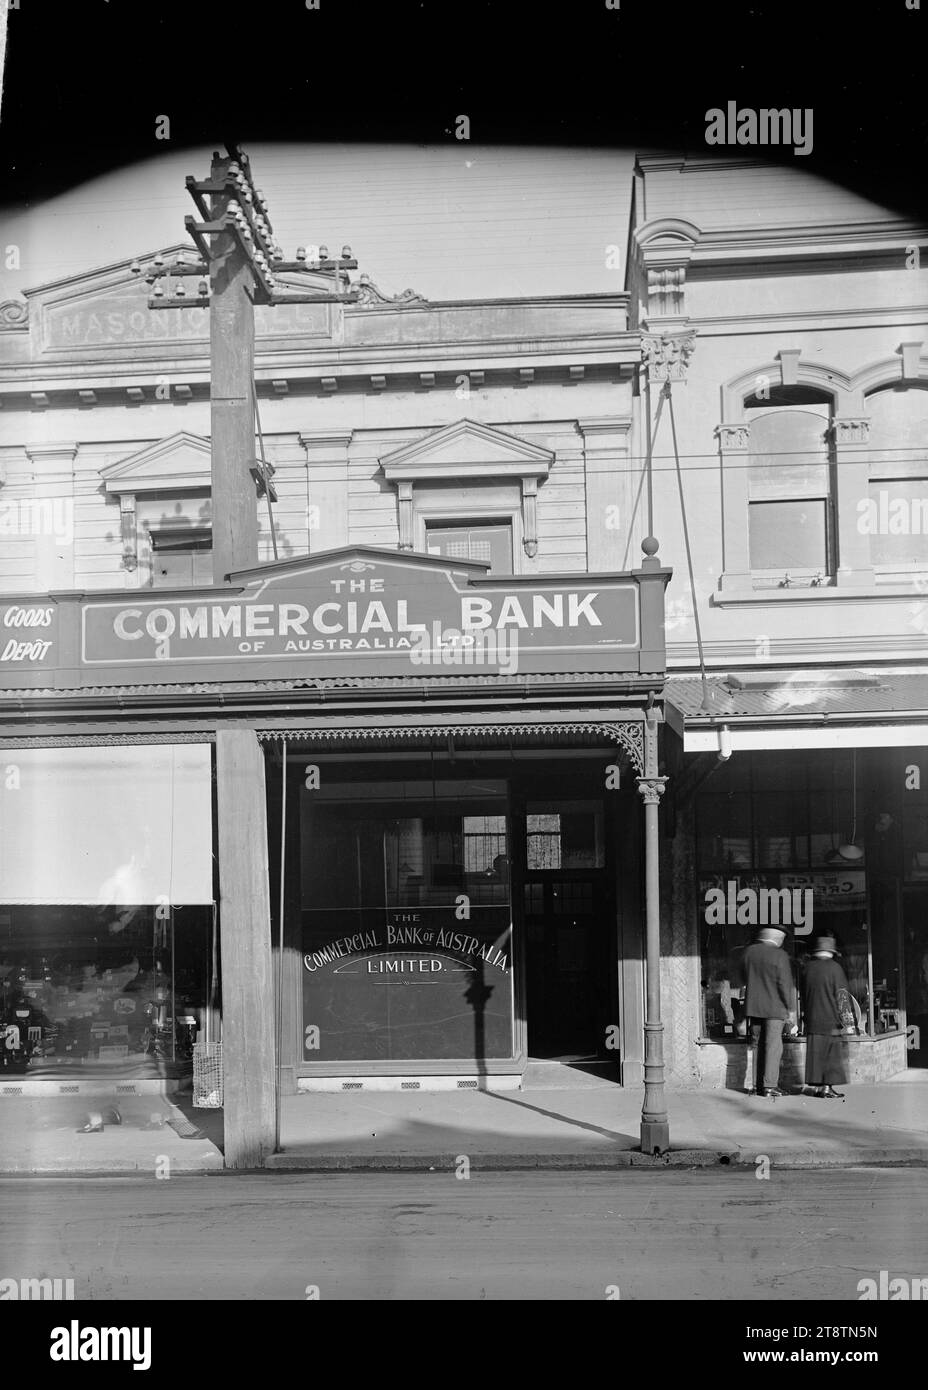 Commercial Bank of Australia, Ltd, Auckland, New Zealand, View of the facade of the Commercial Bank of Australia (CBA) in the Masonic Hall building. in early 1900s Stock Photo